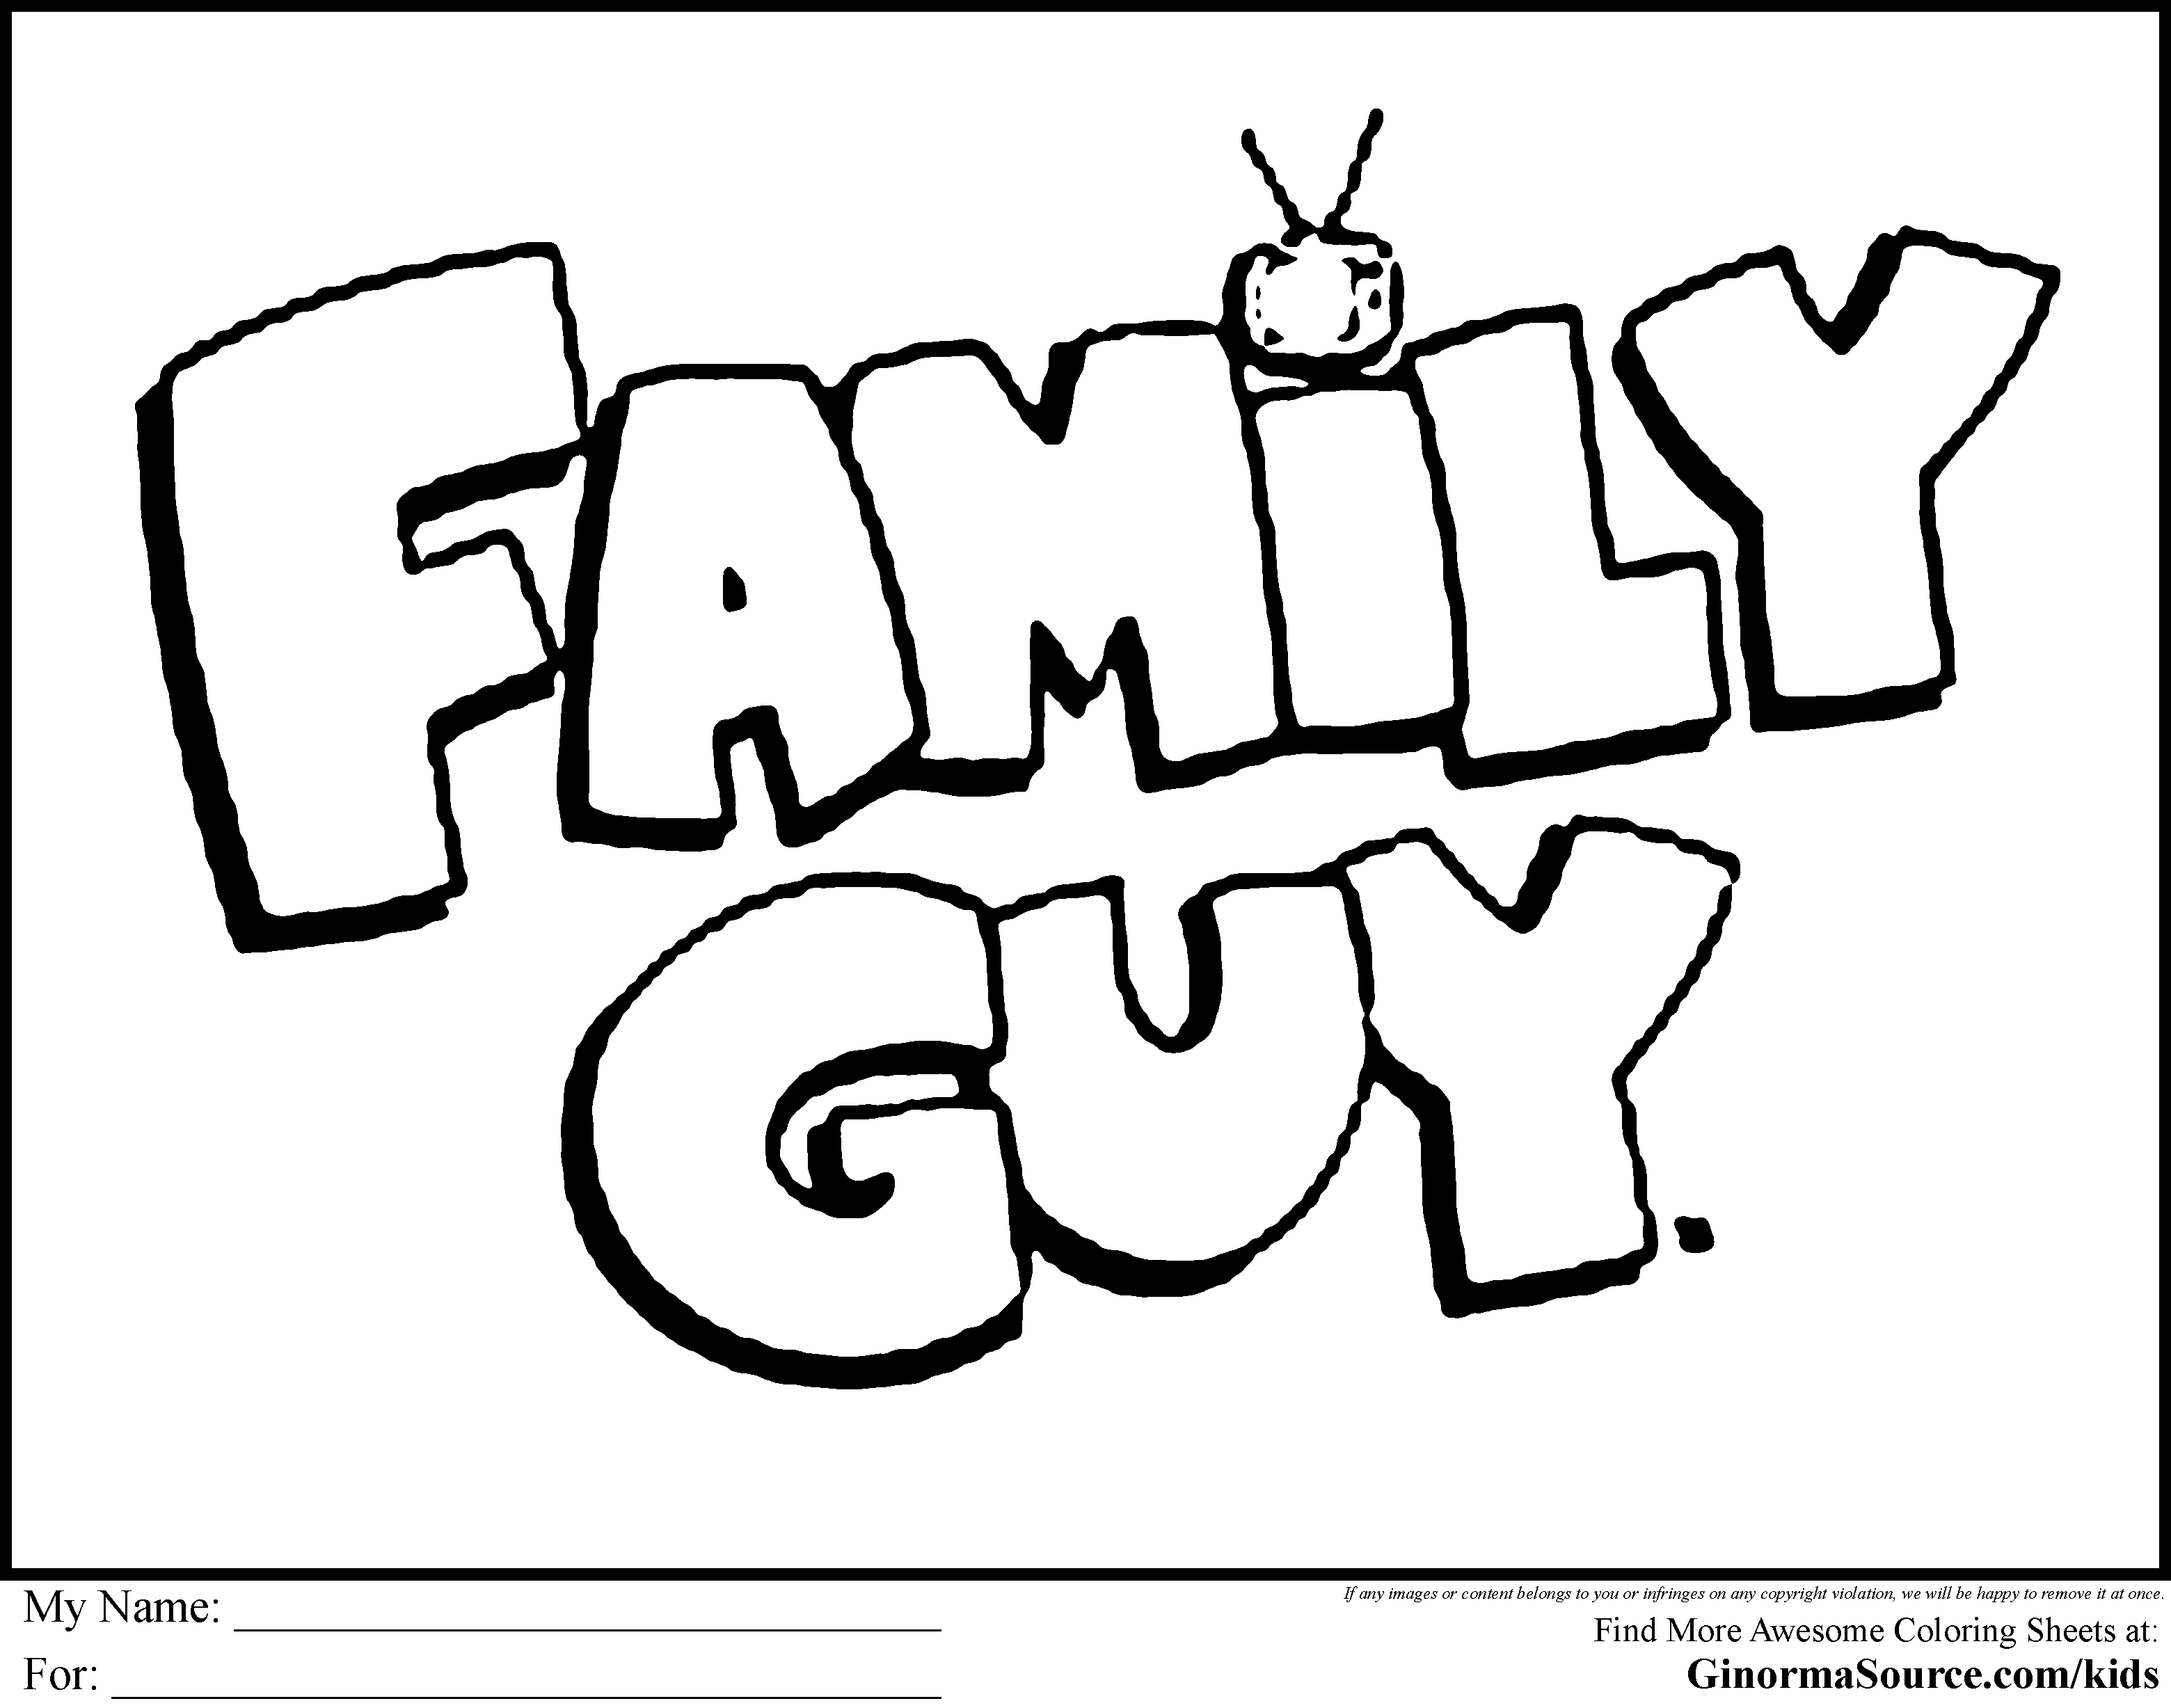 Family Guy Coloring Pages Family Coloring Pages Drawing Books For Kids Cartoon Colori